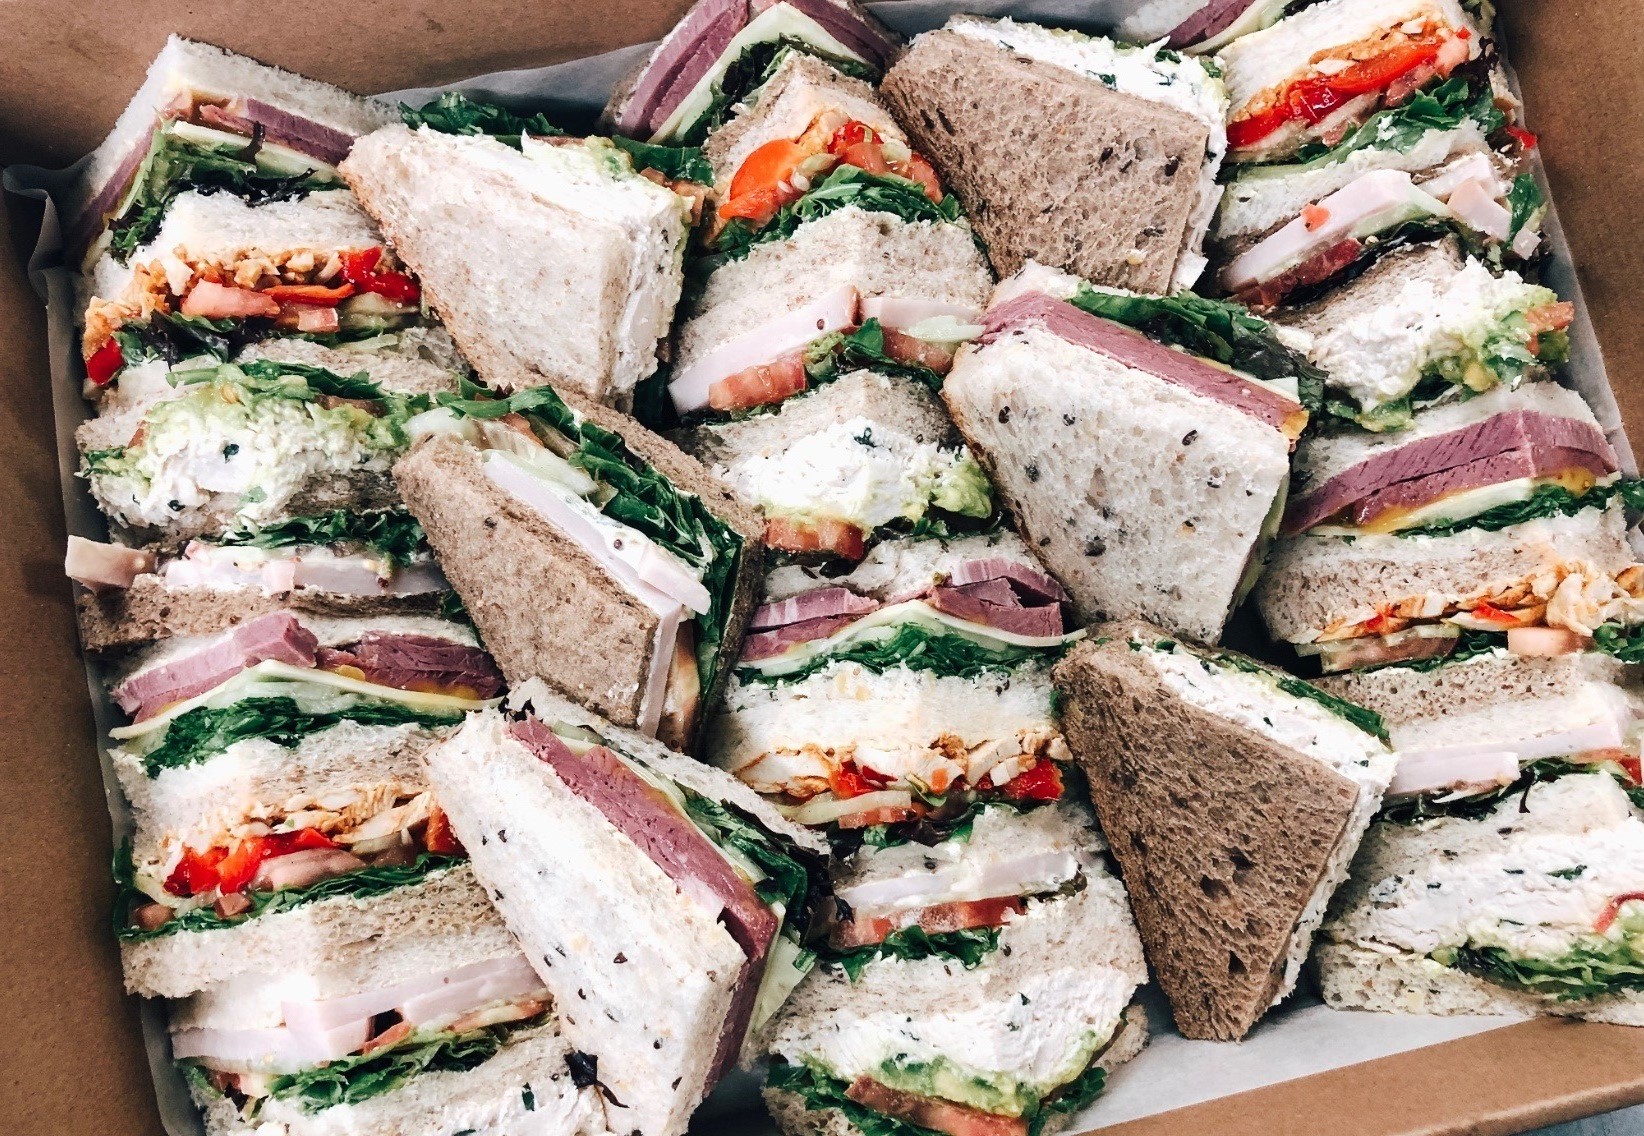 Gourmet Sandwiches - Chefscene Catering